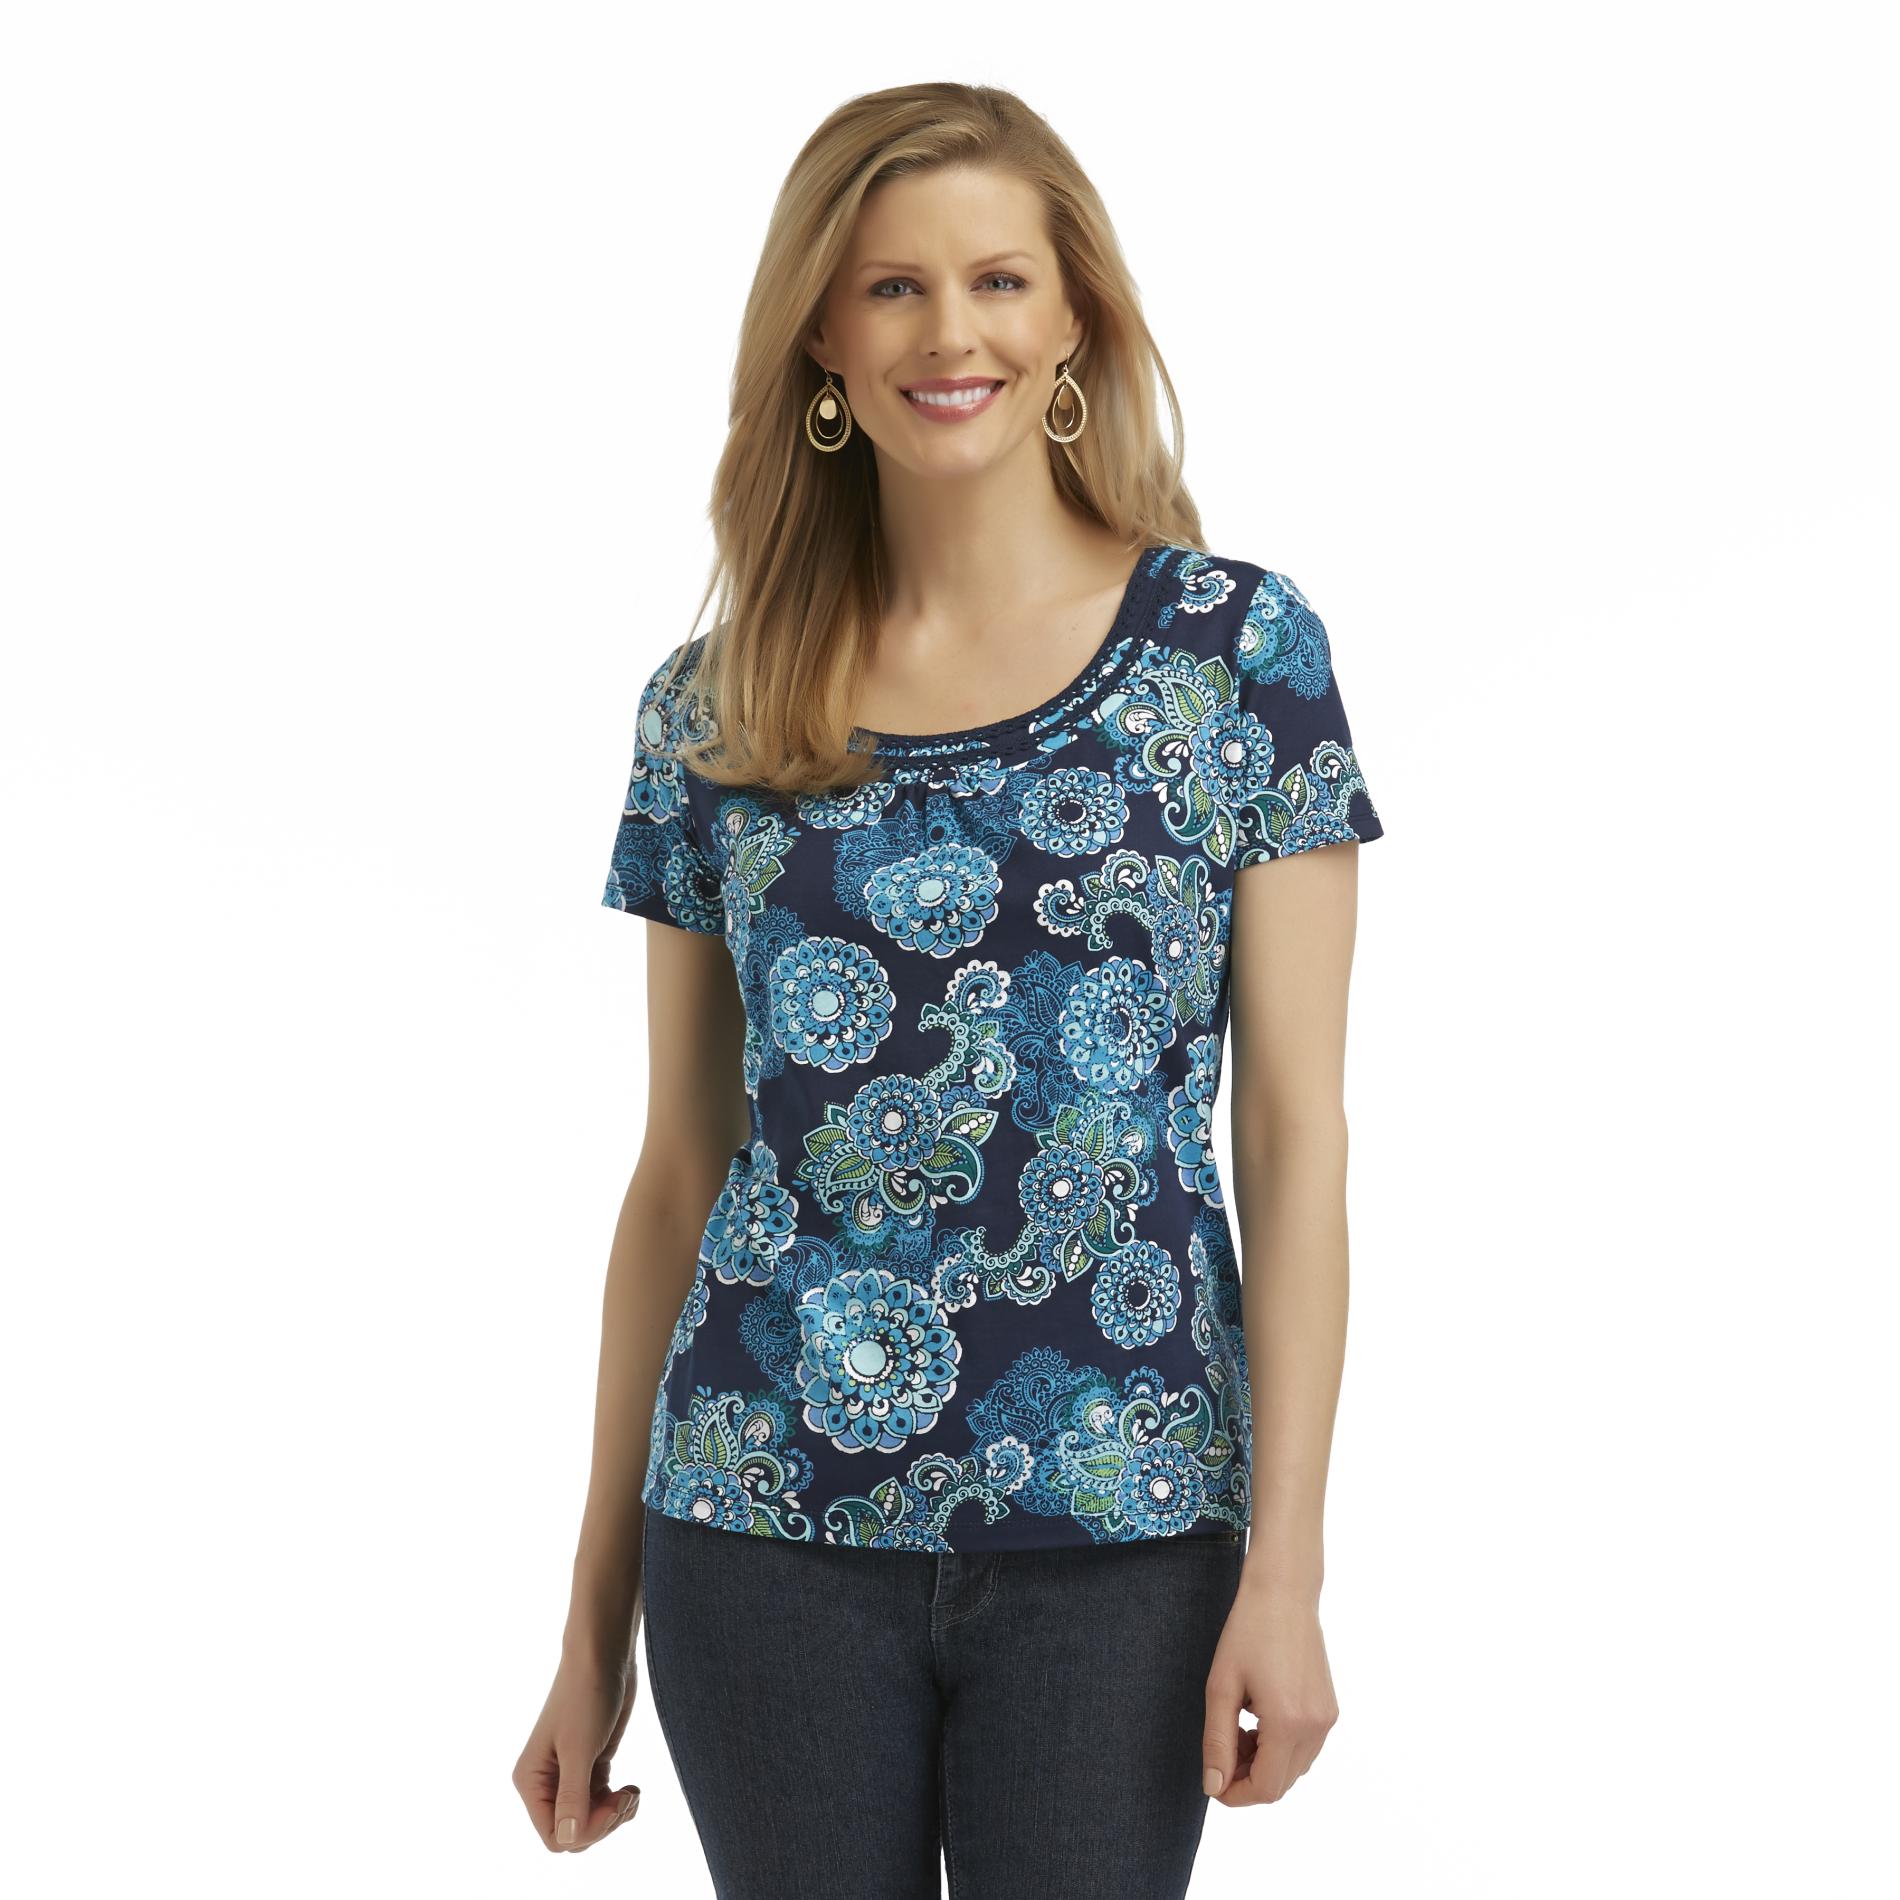 Basic Editions Women's Graphic Lace T-Shirt - Floral